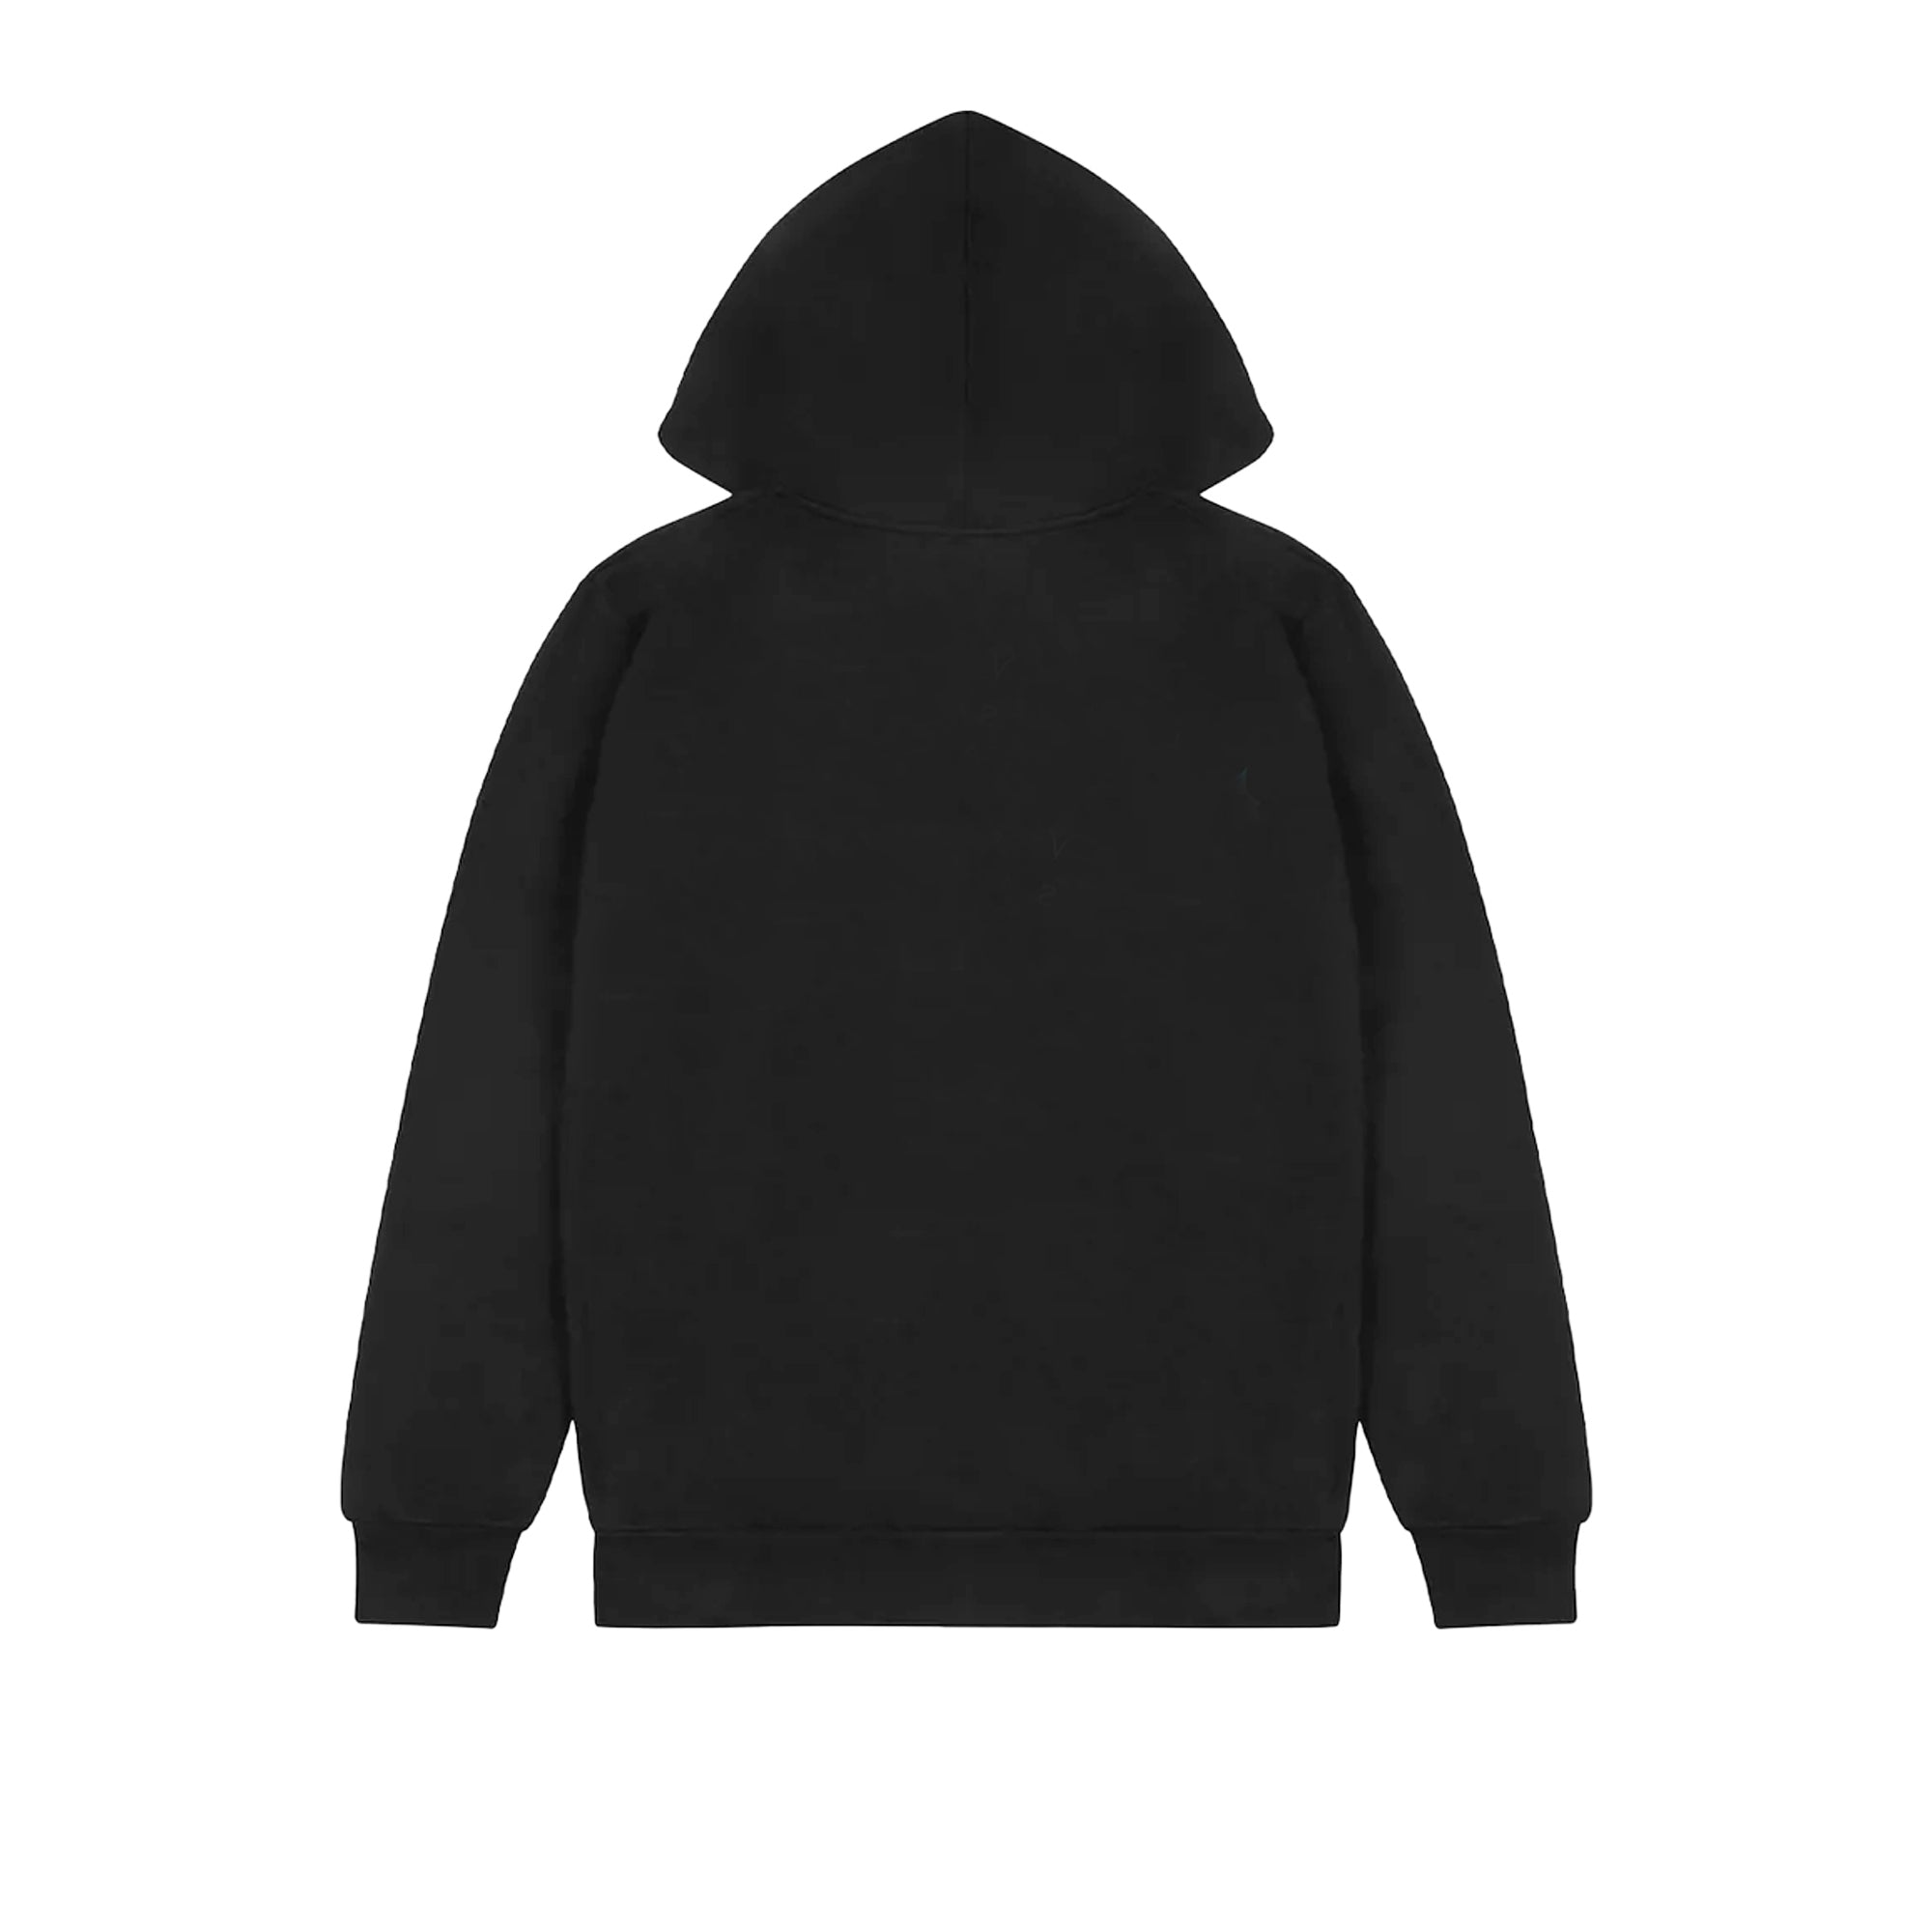 Decoded Camo Hoodie - Trapstar Blackout Edition